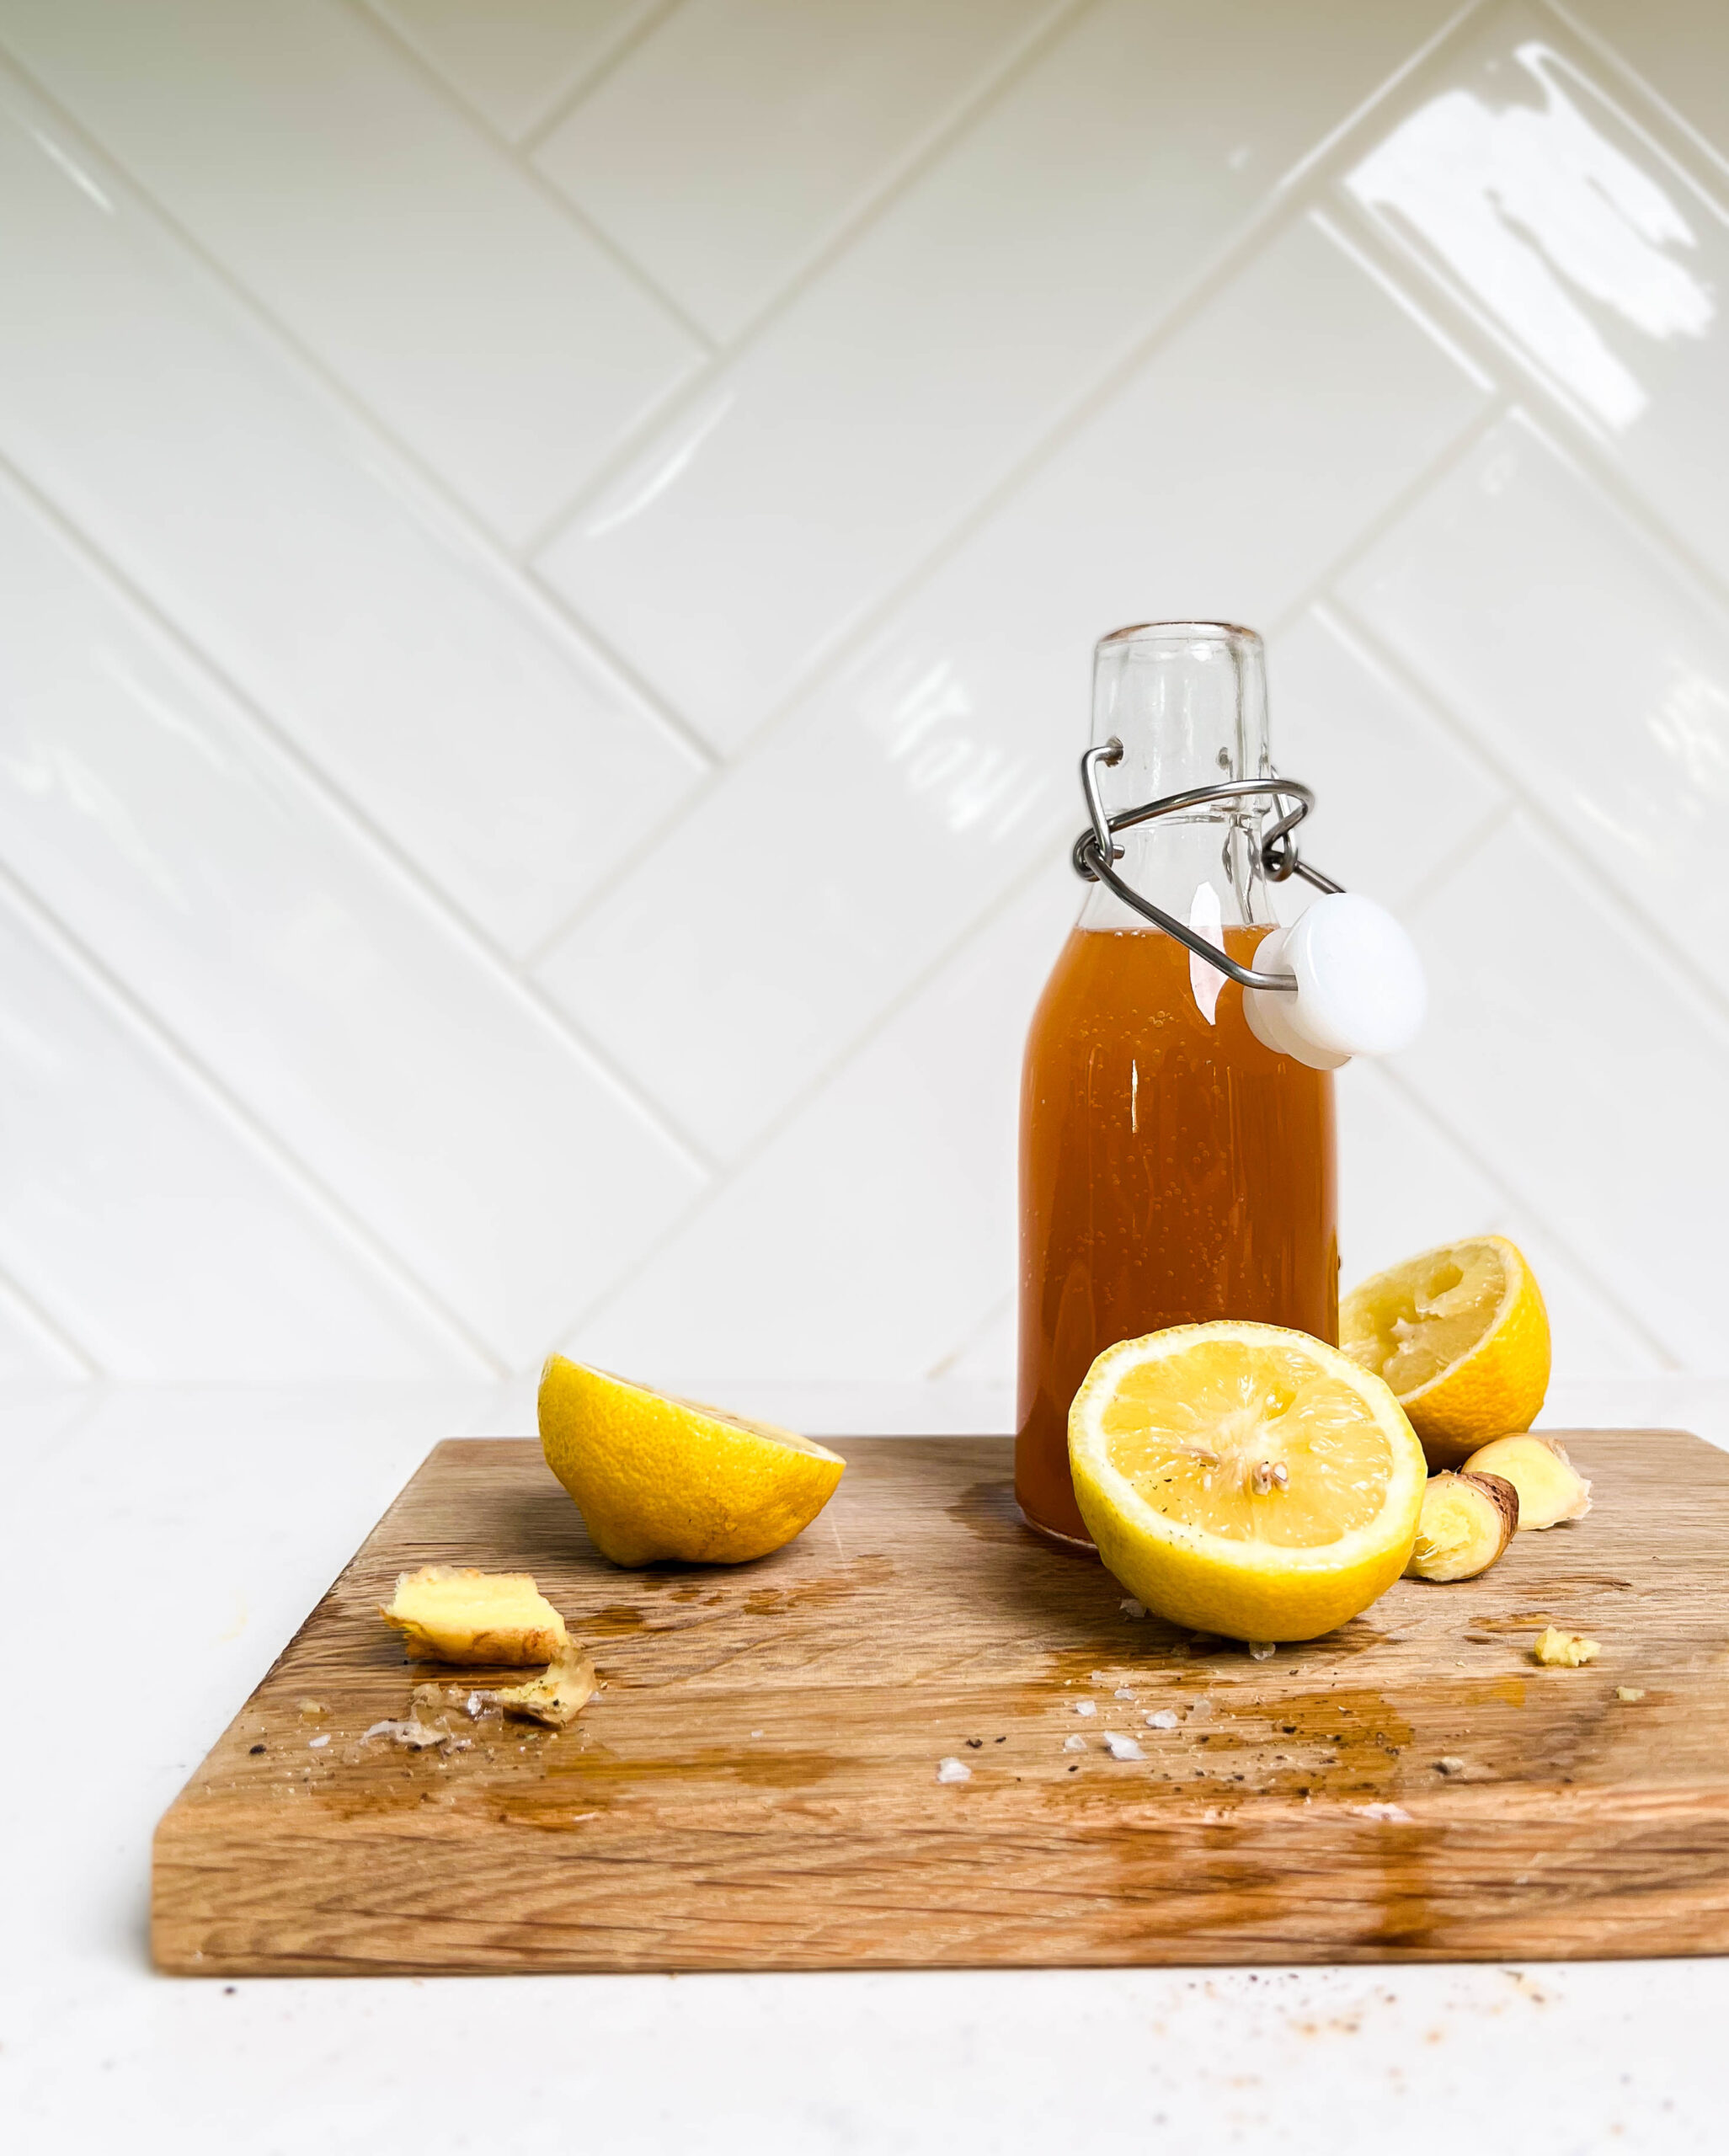 cutting board with lemon and glass bottle on top